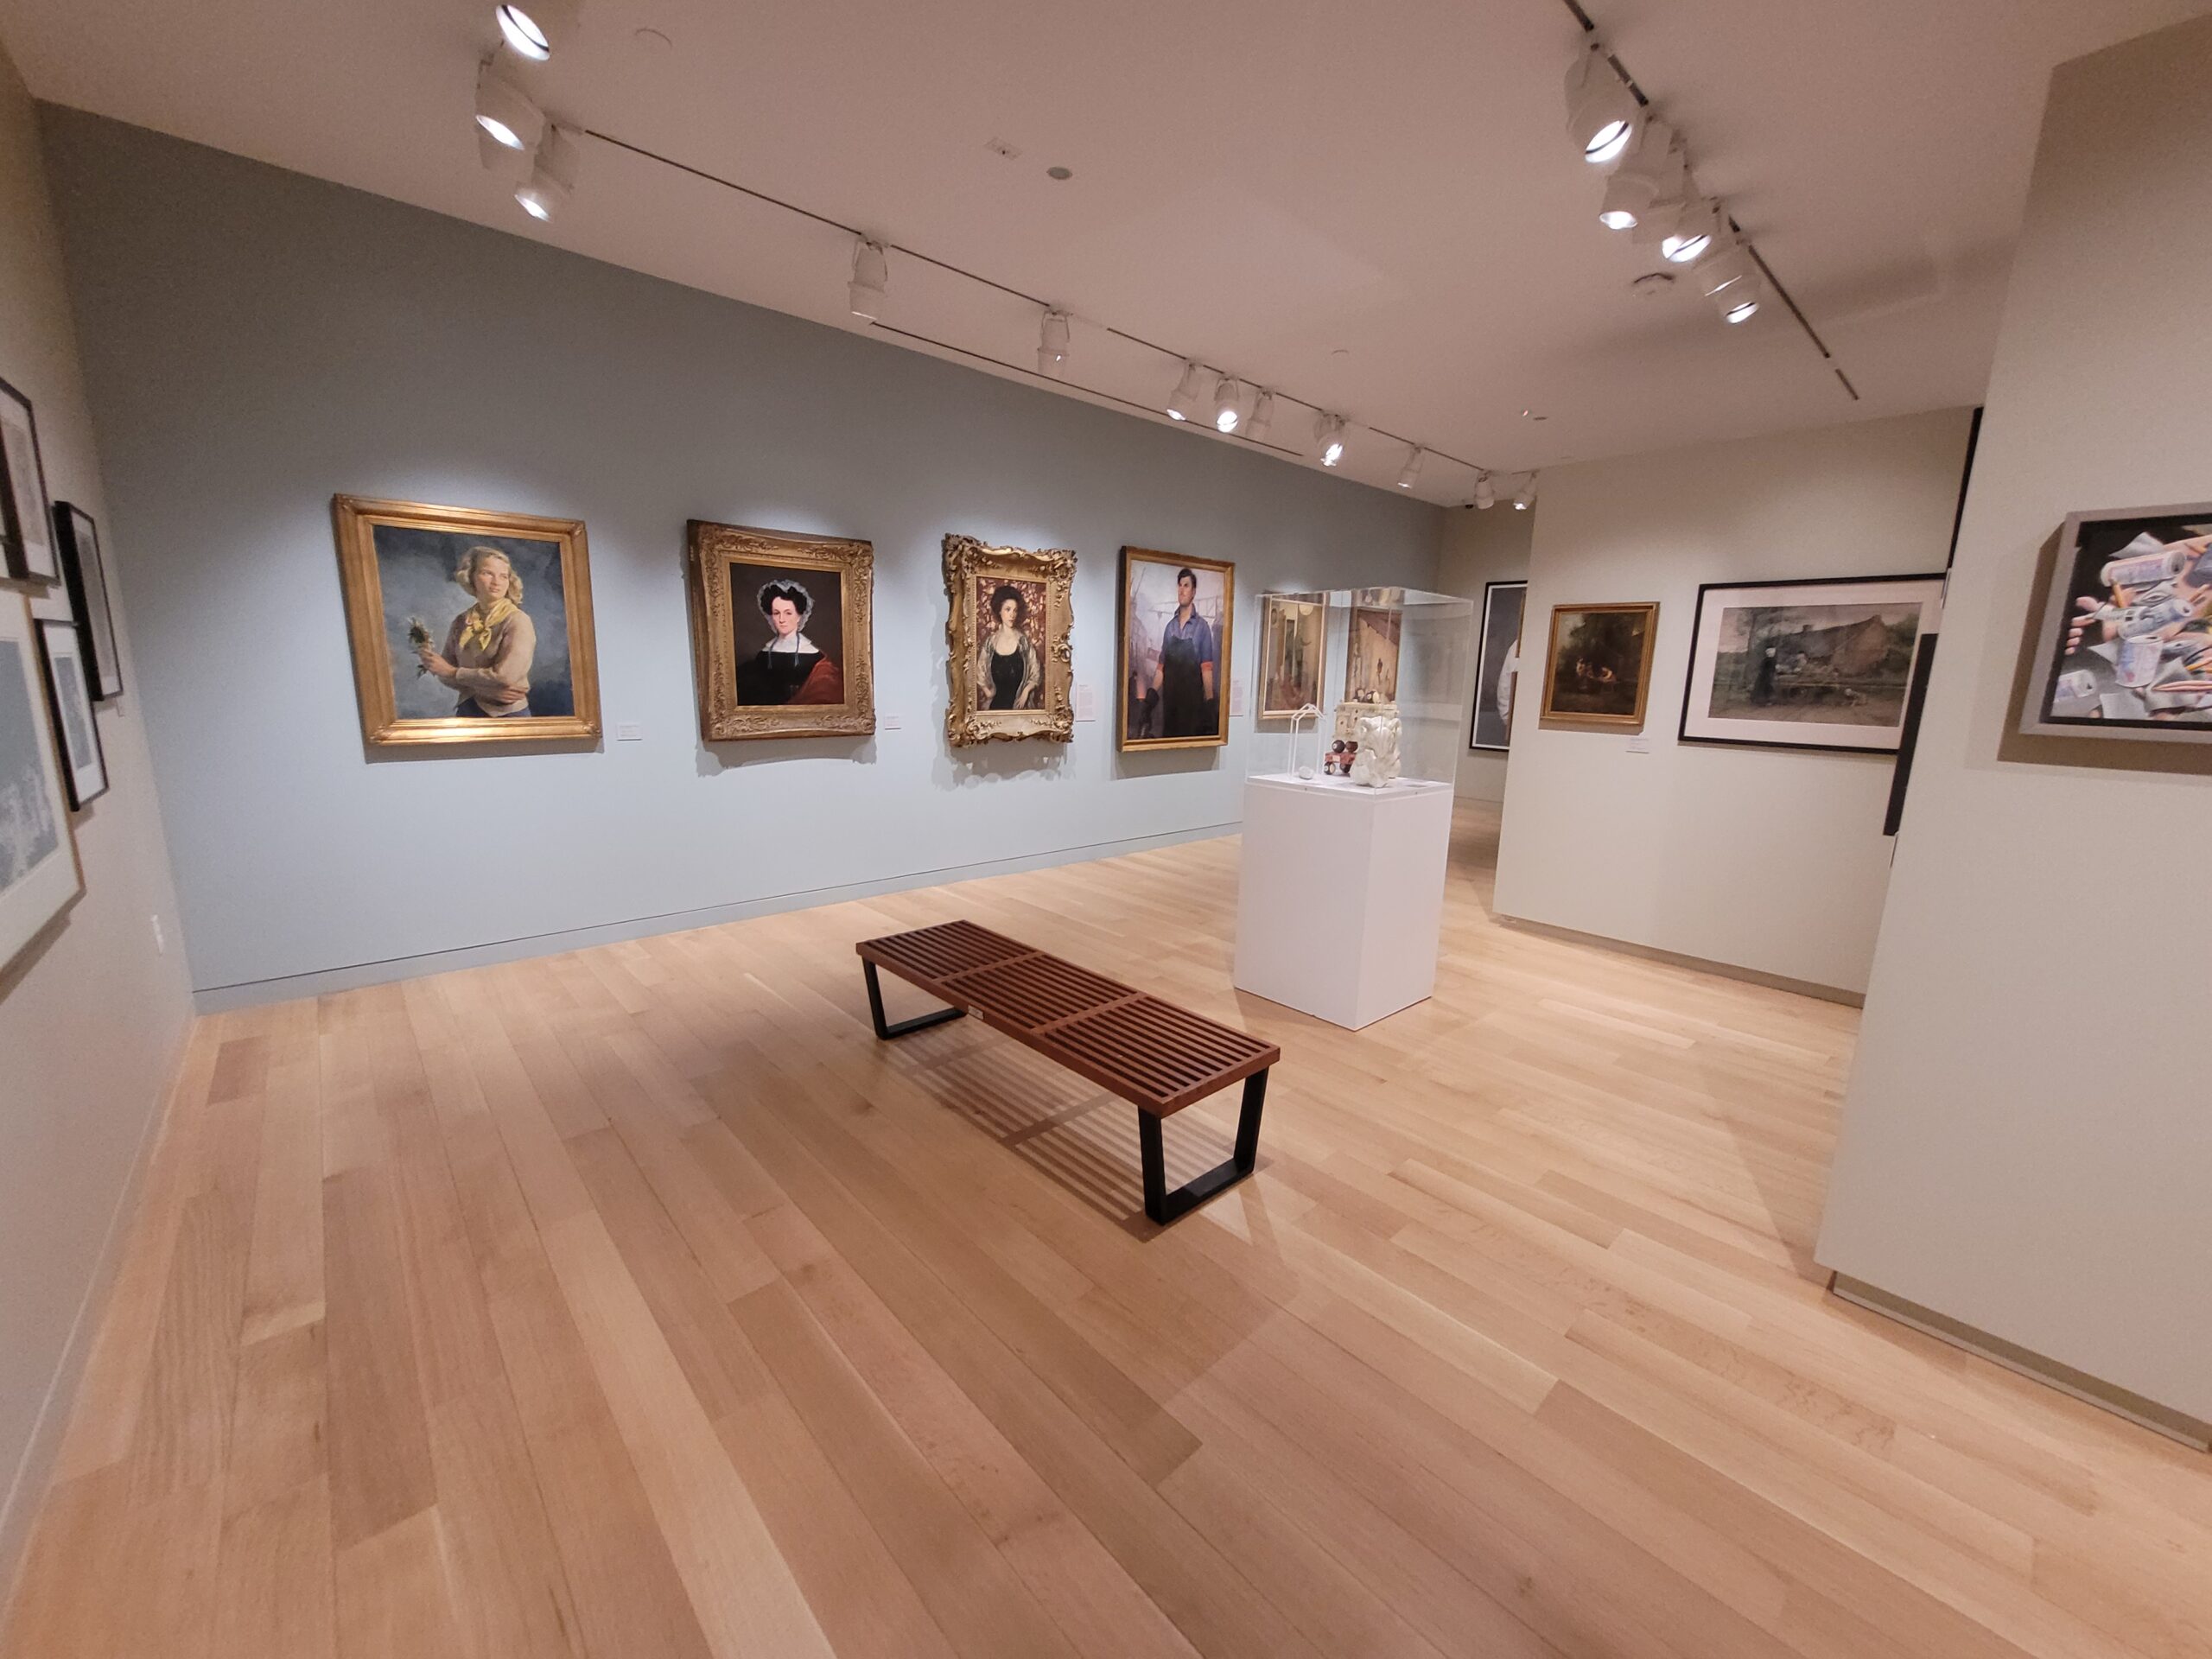 Photograph of a gallery installation with blue and grey-green walls and light brown wood floors. There are various artworks hanging on all the walls, and a floor case with clear top is holding three sculpture works.